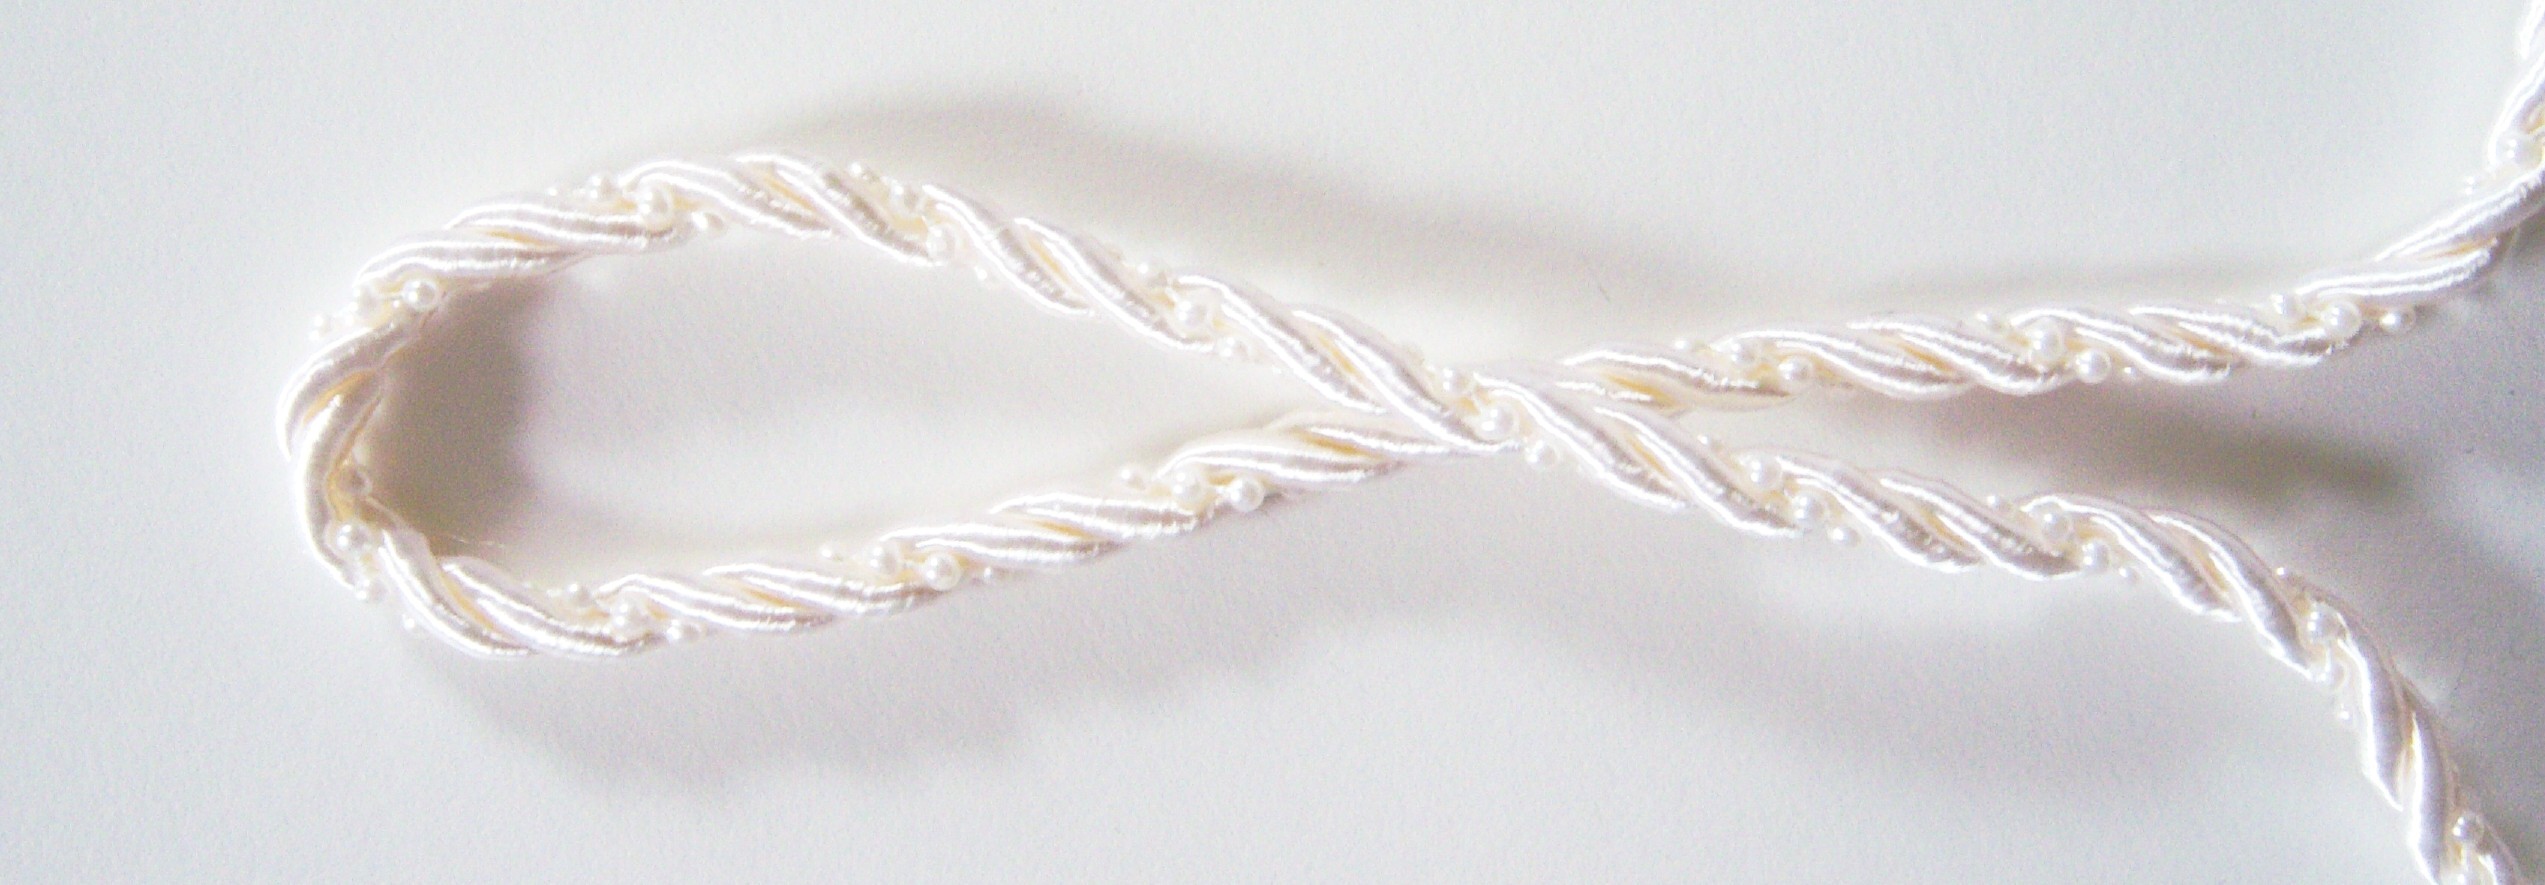 Ant. White/Pearls 1/4" Cord Sewing Trim